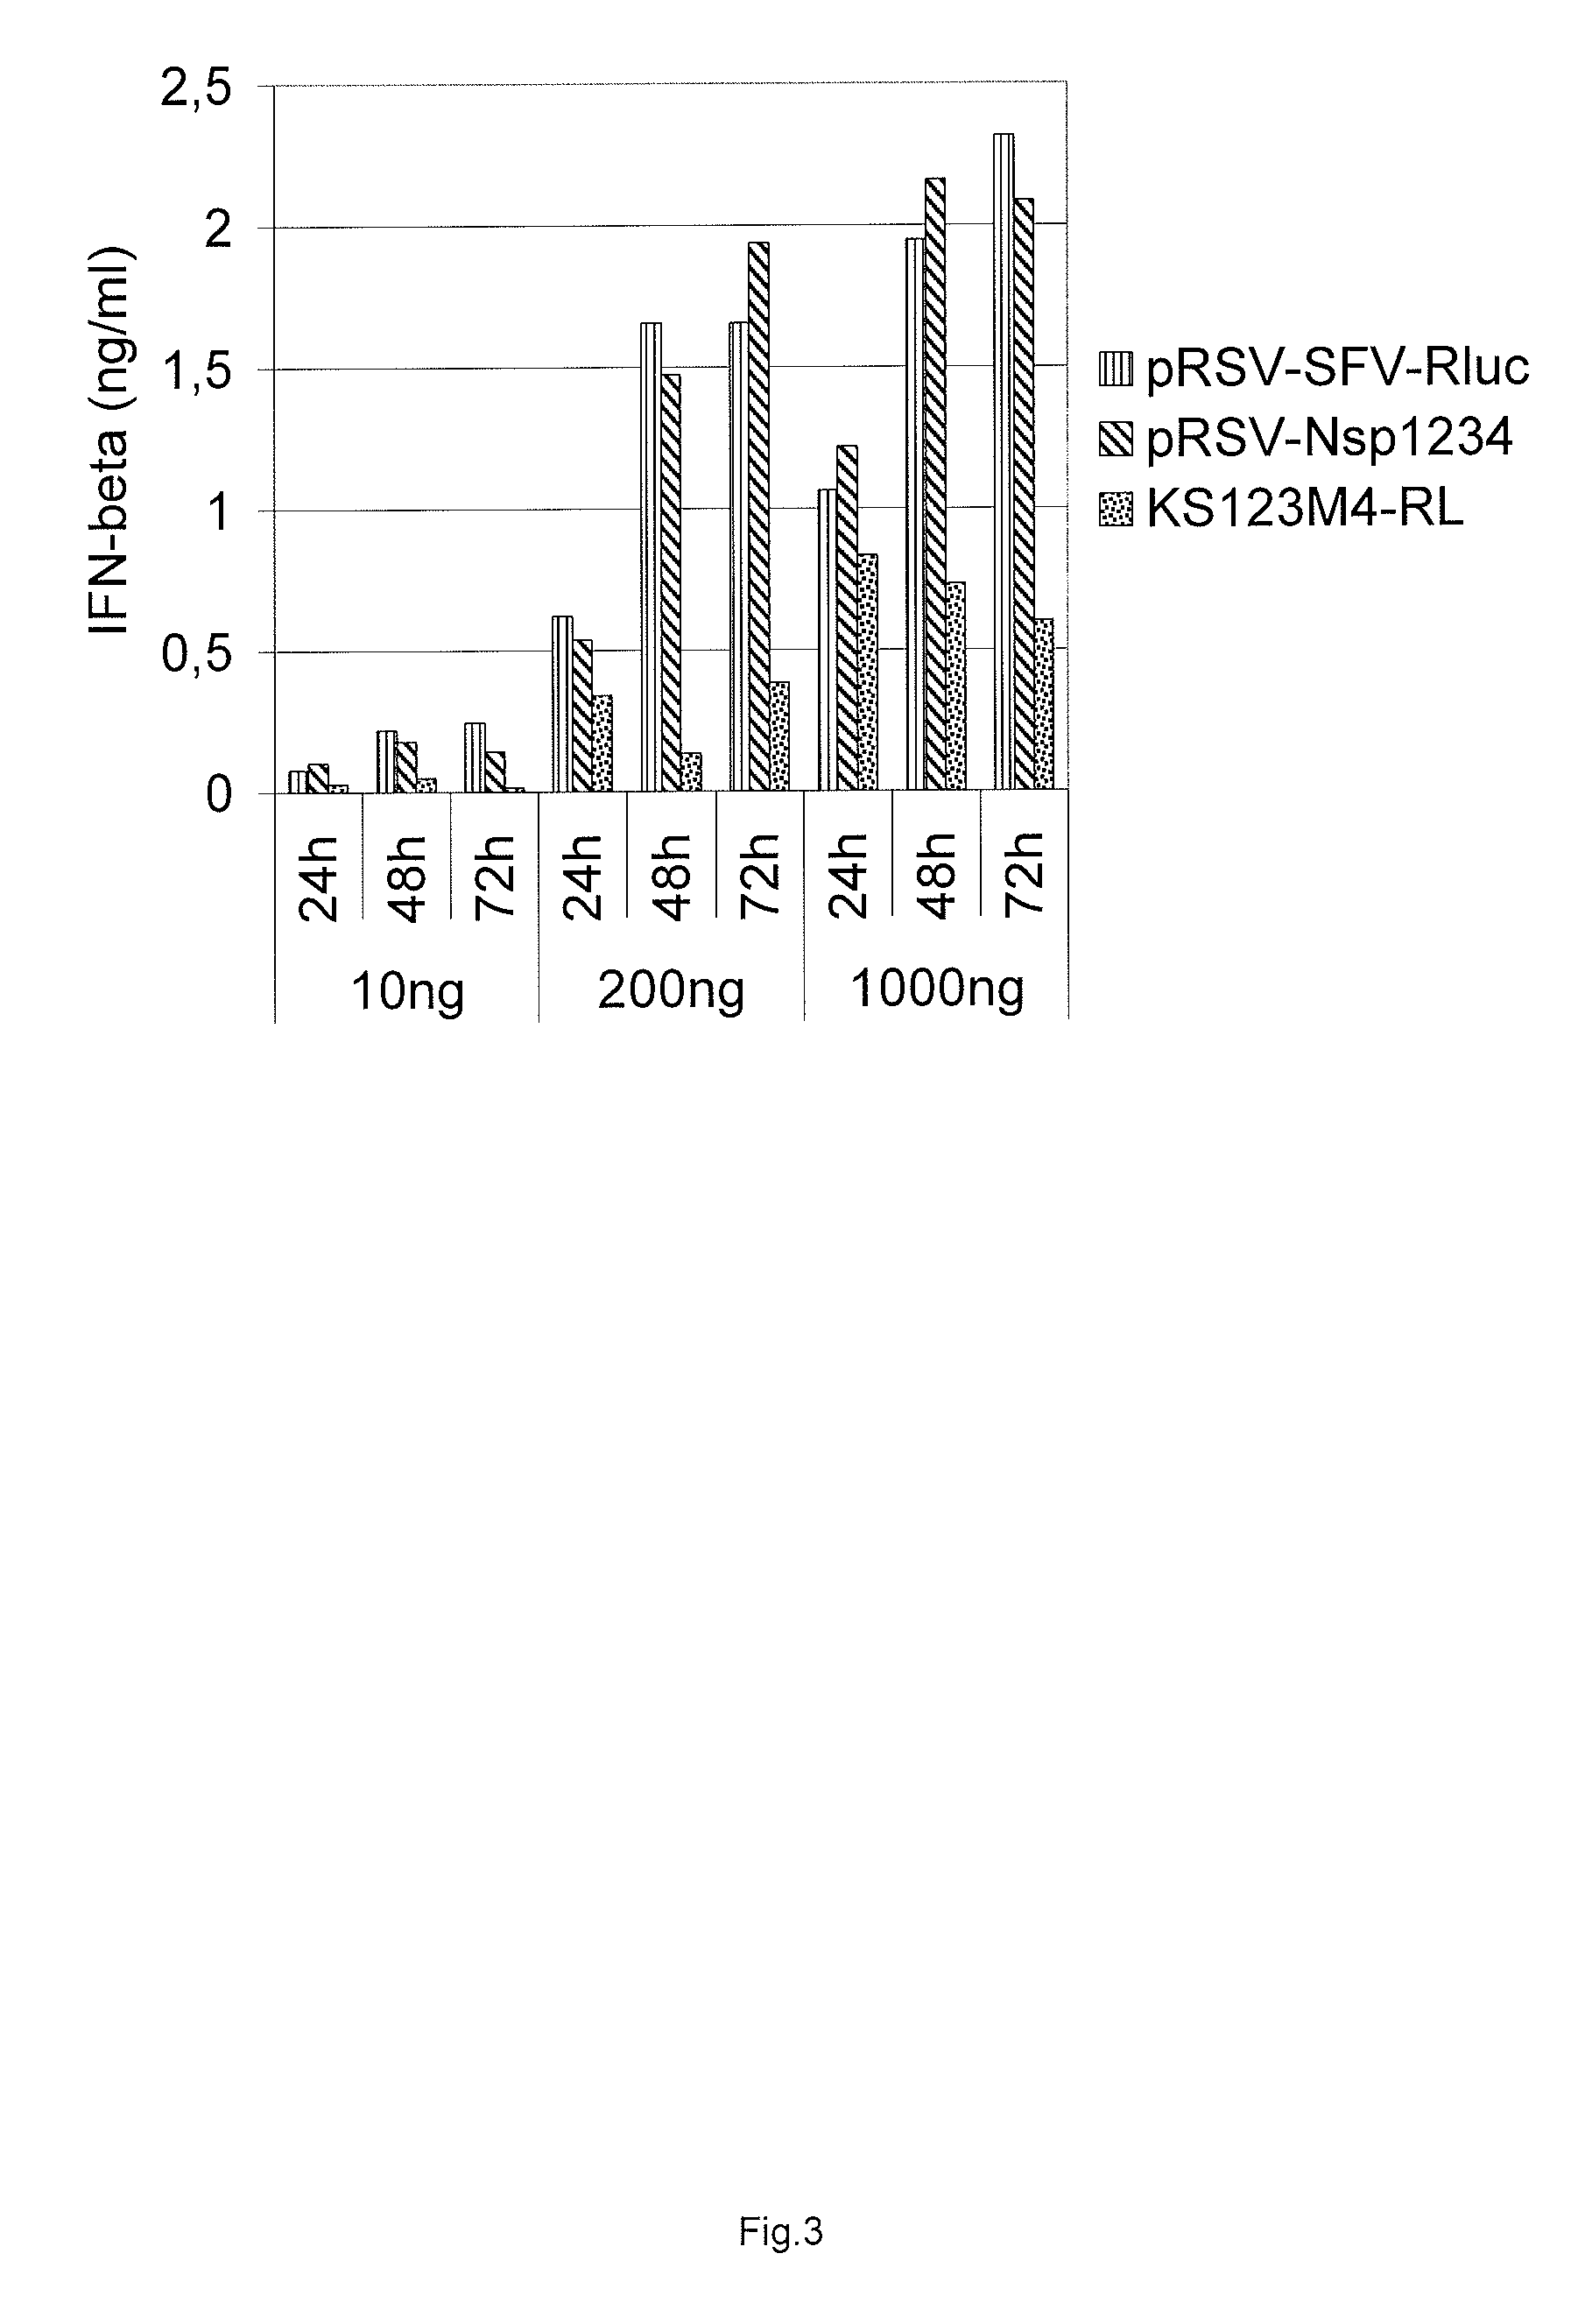 Expression vector encoding alphavirus replicase and the use thereof as immunological adjuvant